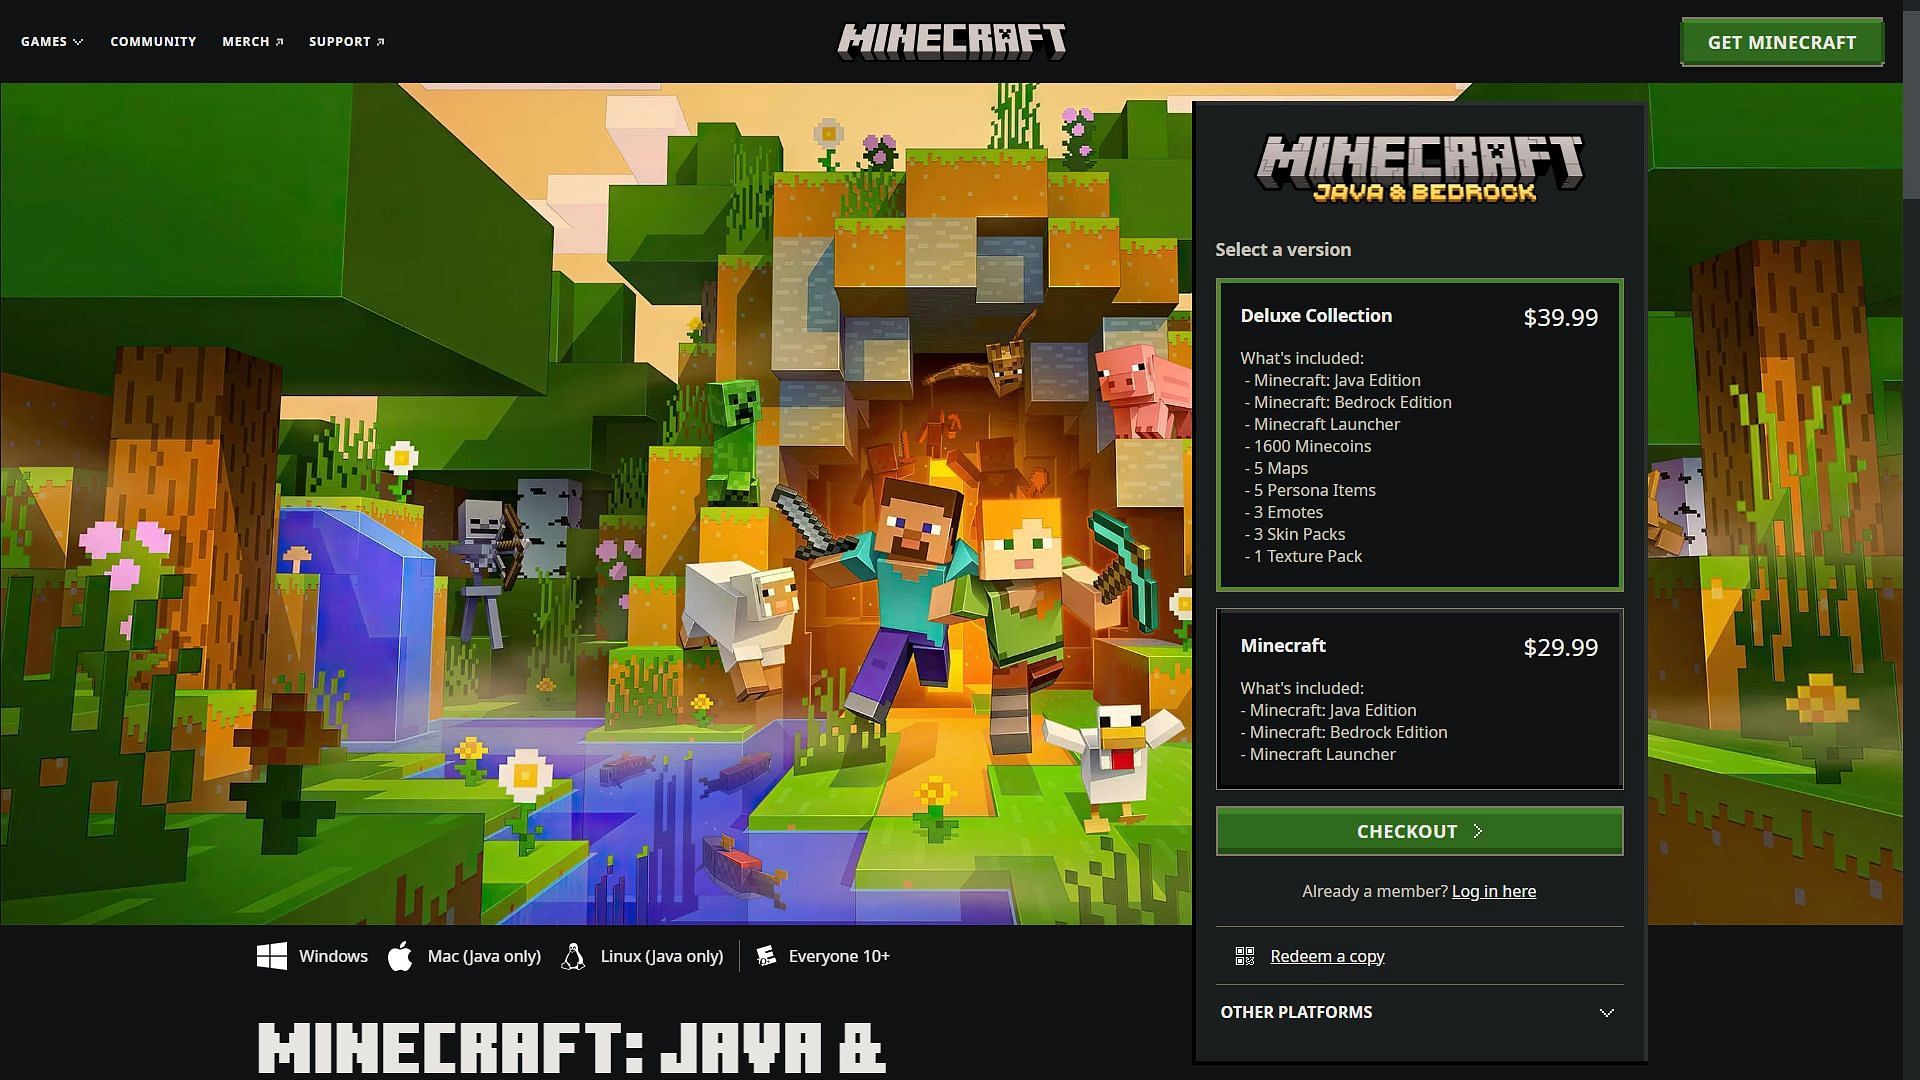 Both Java and Bedrock Editions can be purchased on PC for $29.99. (Image via Sportskeeda)